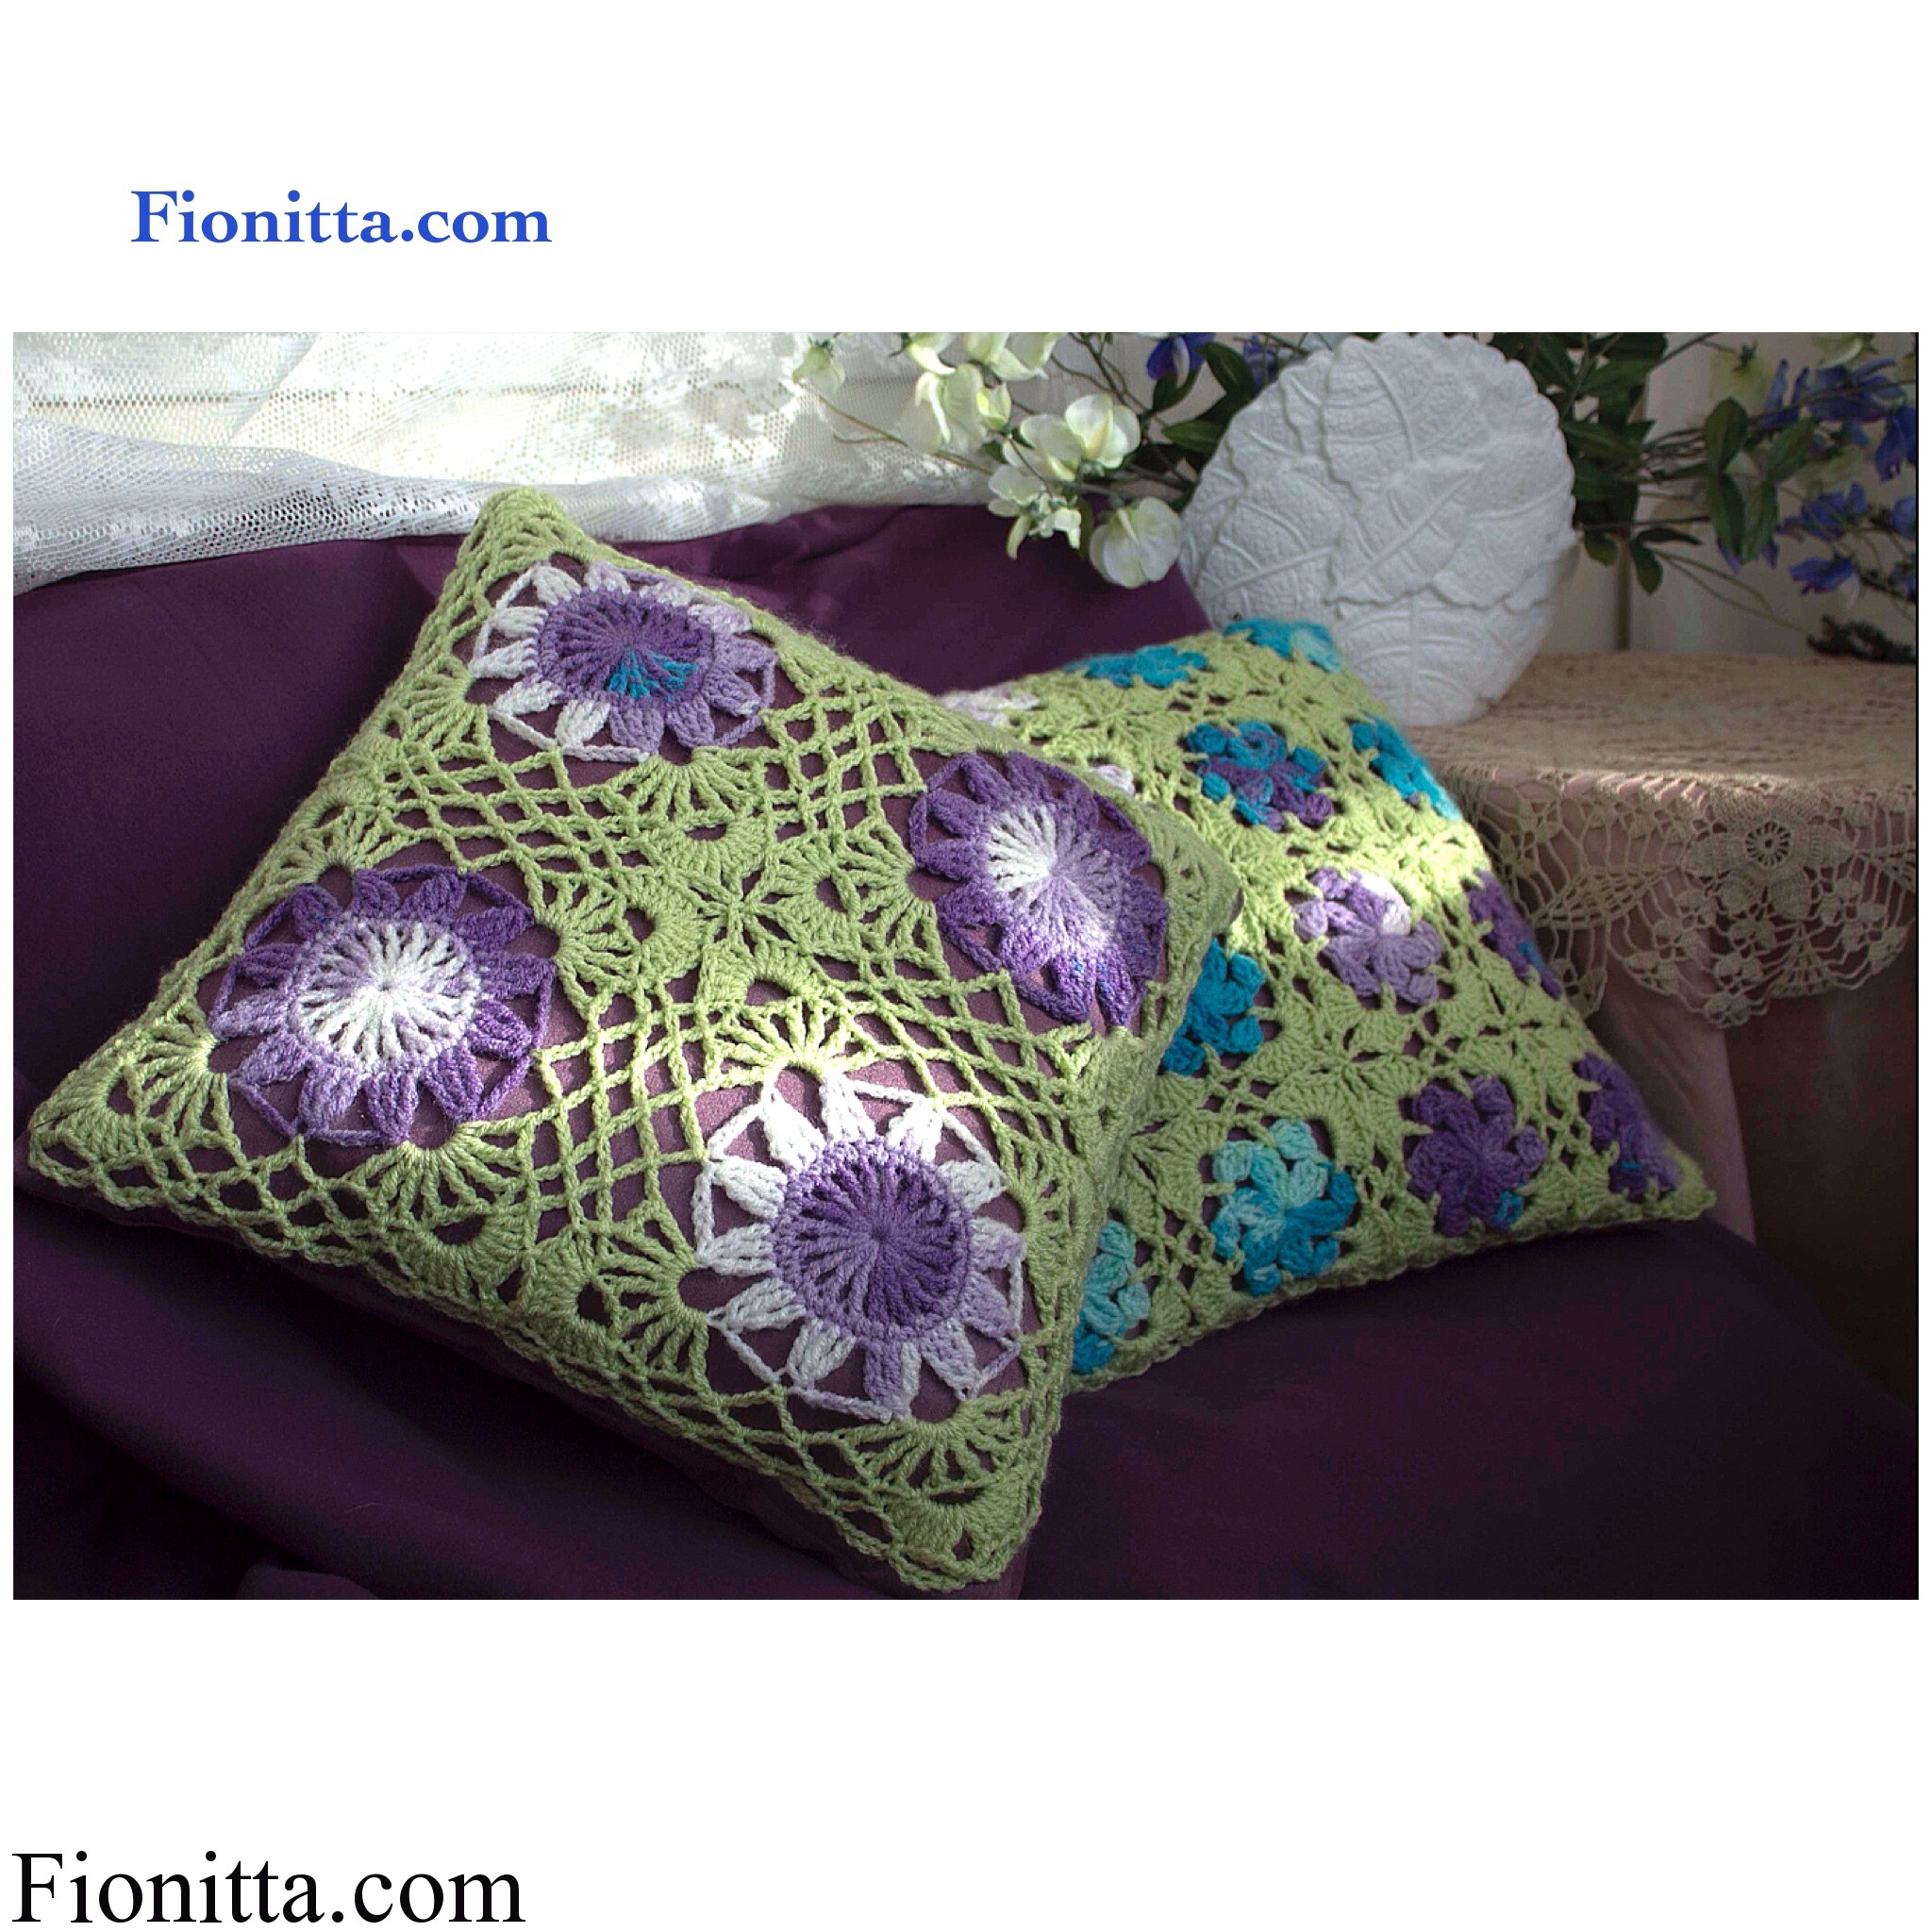 Two square crochet pillows